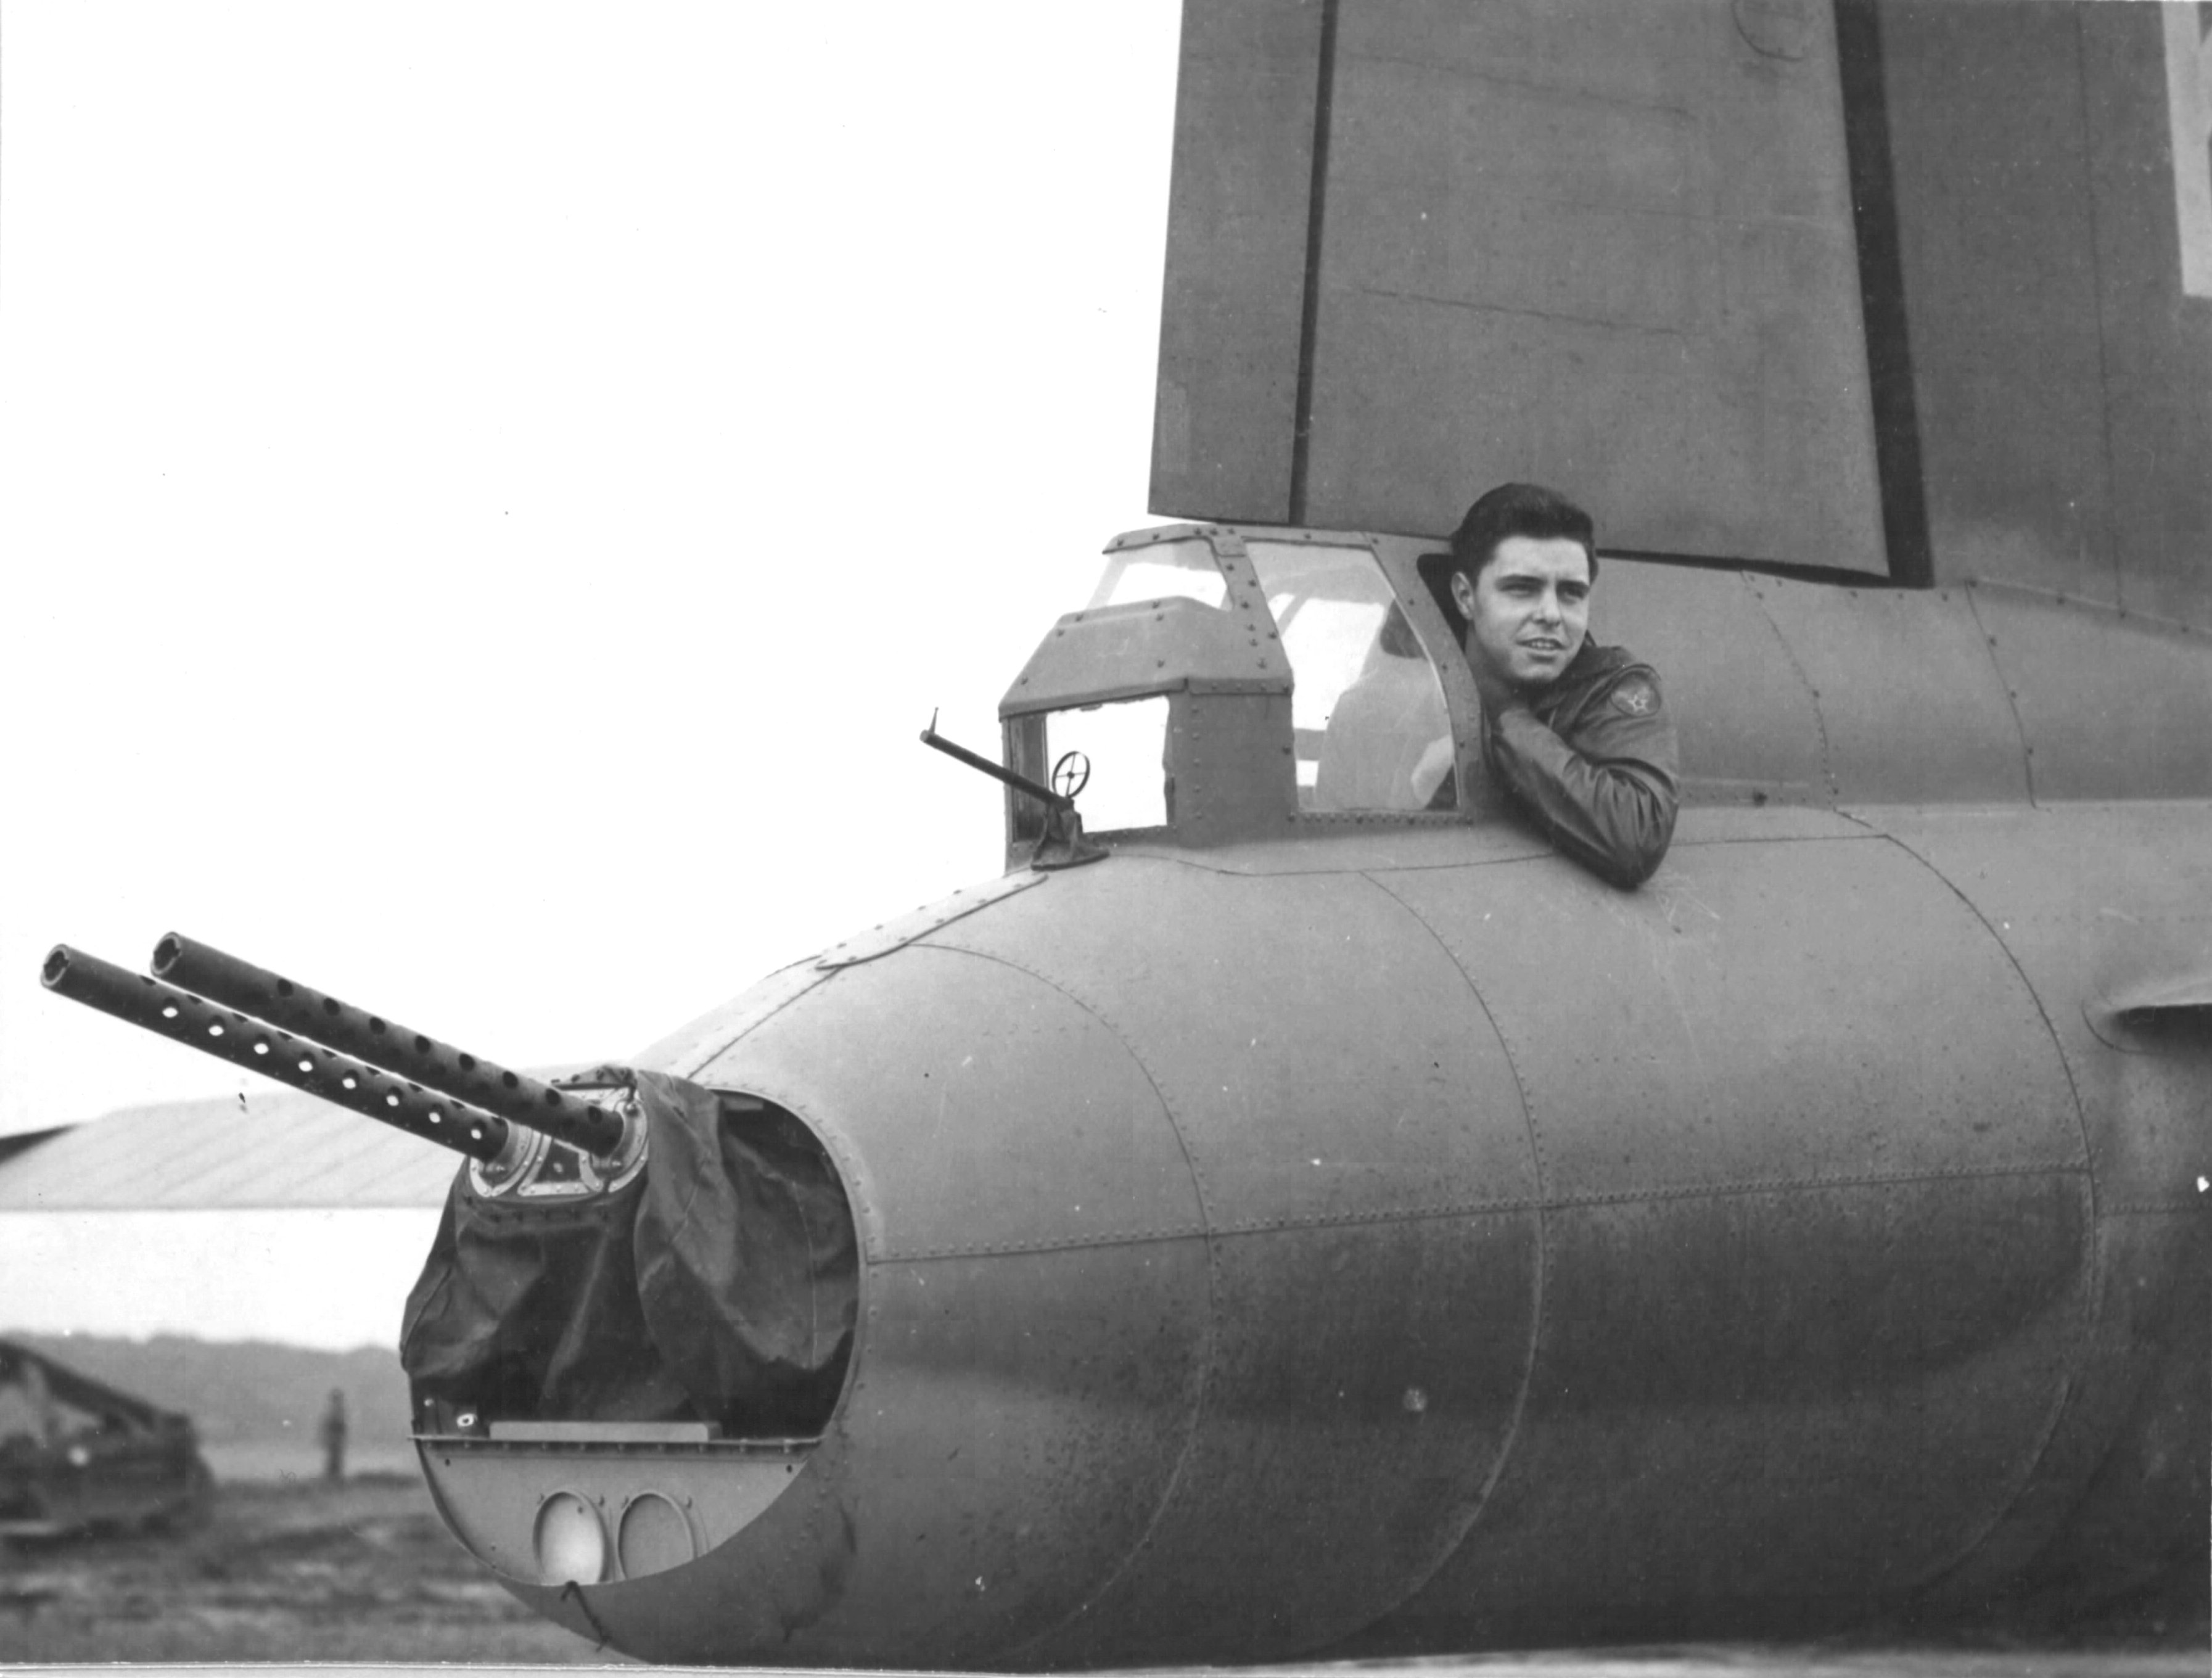 SSgt James F Jones, B-17 Fortress tail gunner with the 560th Bomb Squadron, 388th Bomb Group shows the tight fit of the position, RAF Knettishall, Suffolk, England, UK, Sep 1943